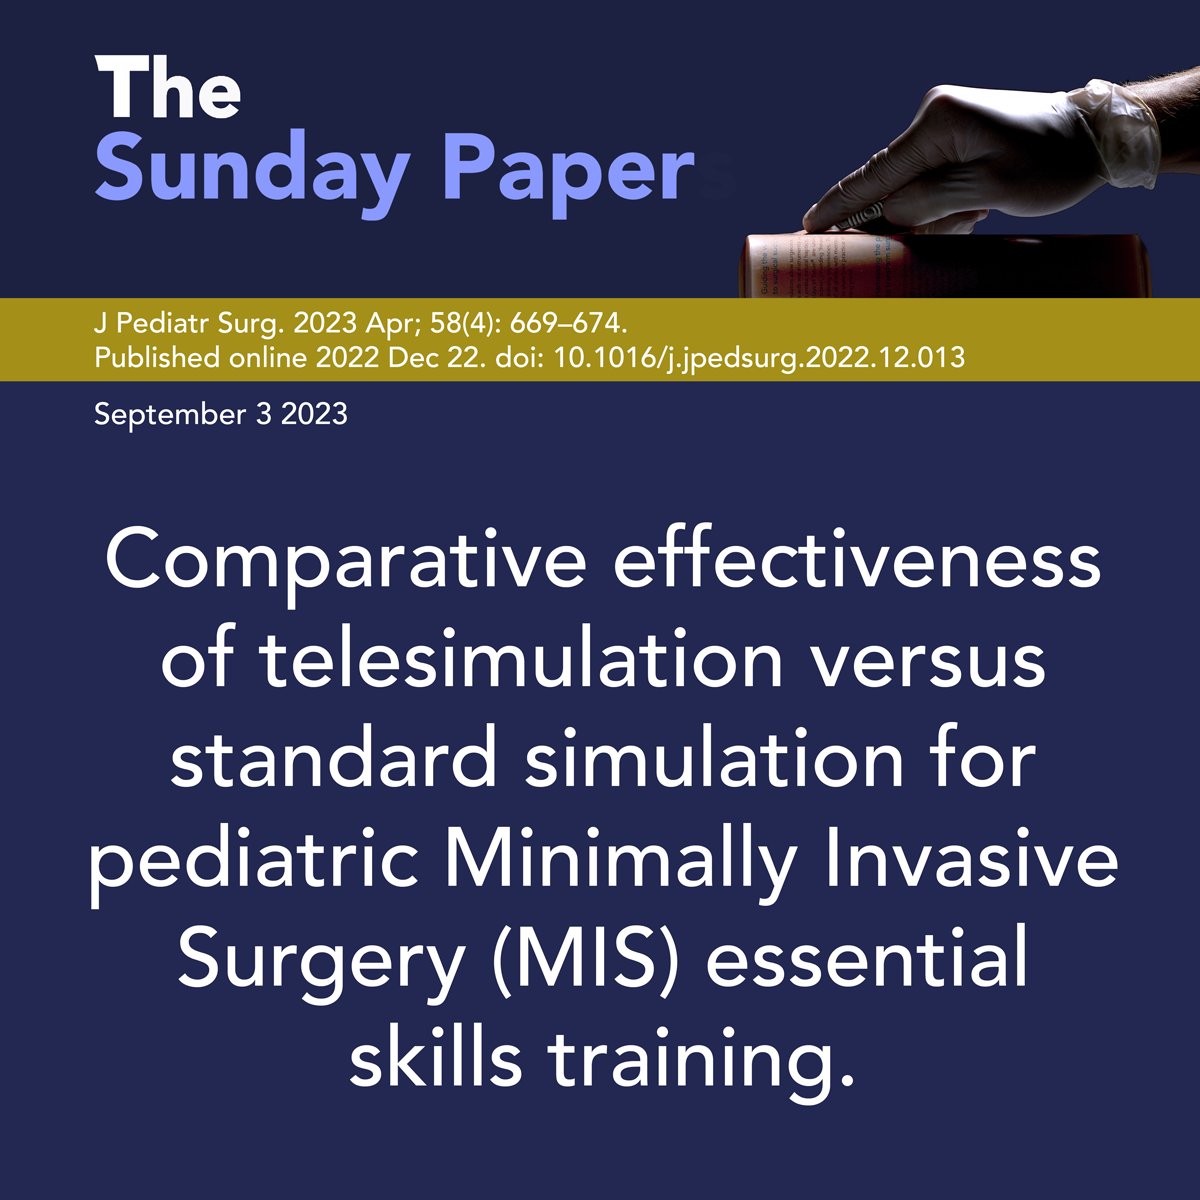 Todays post is about: Comparative effectiveness
of telesimulation versus standard simulation for
pediatric Minimally Invasive Surgery (MIS) essential
skills training.
Click here to read: linkedin.com/groups/1278561…